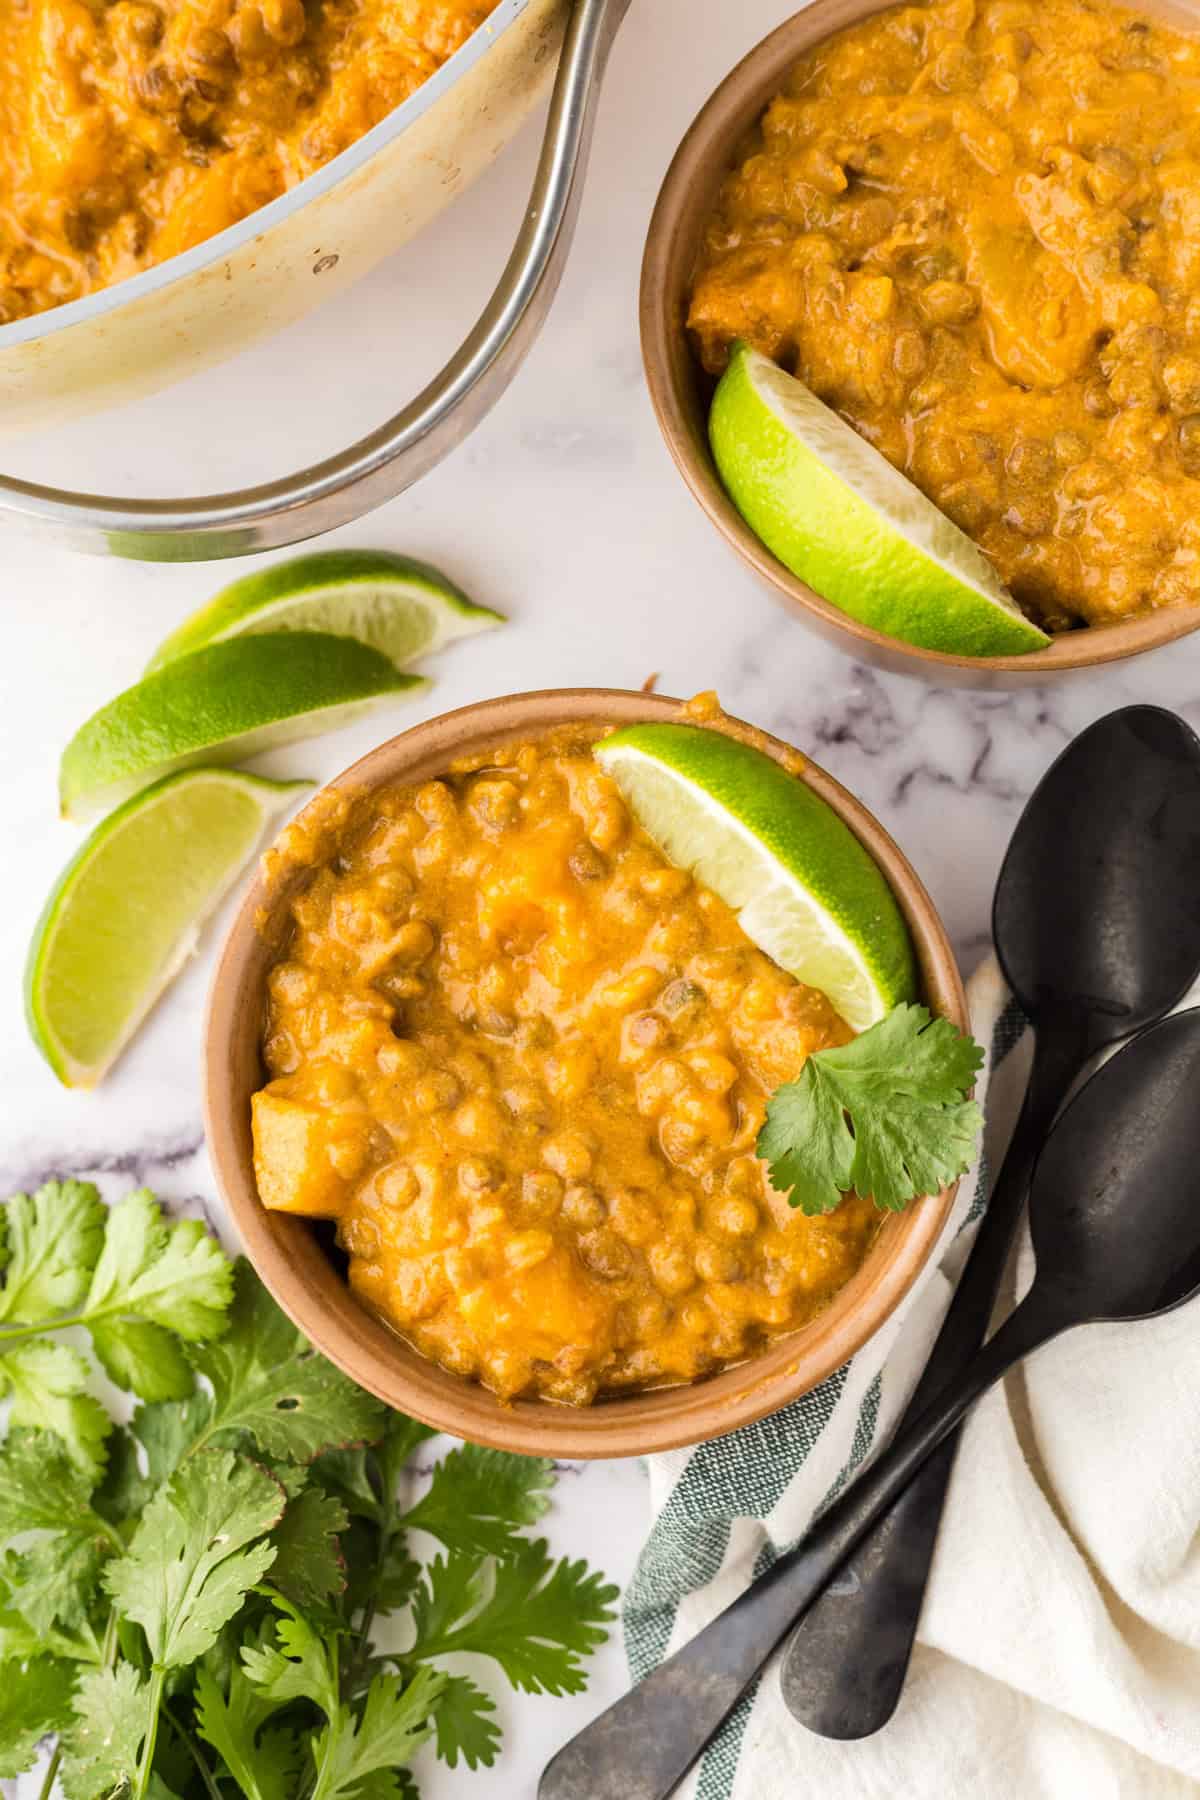 lentil curry finished and in a bowl garnished with limes.